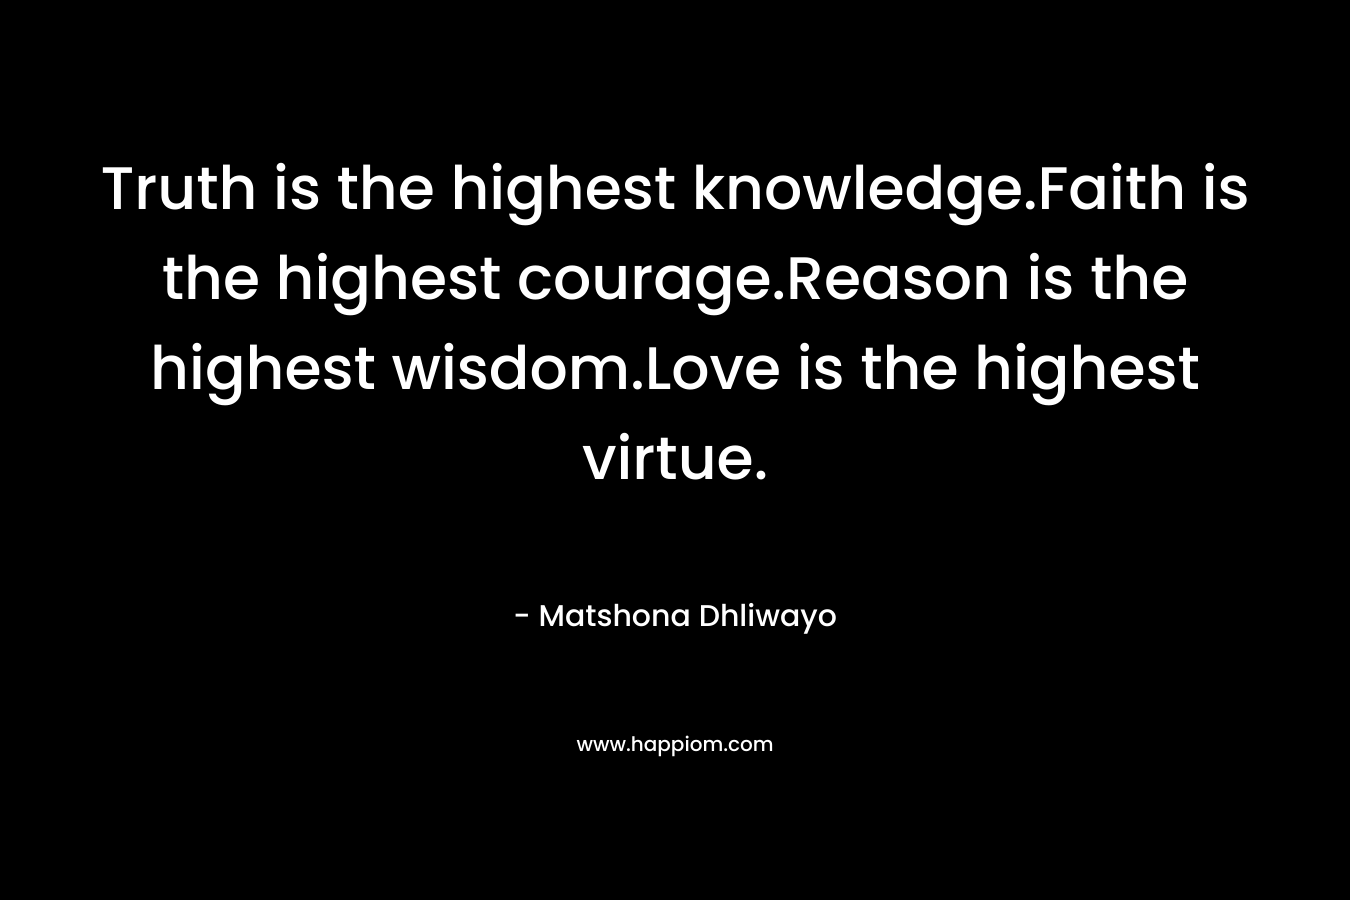 Truth is the highest knowledge.Faith is the highest courage.Reason is the highest wisdom.Love is the highest virtue.